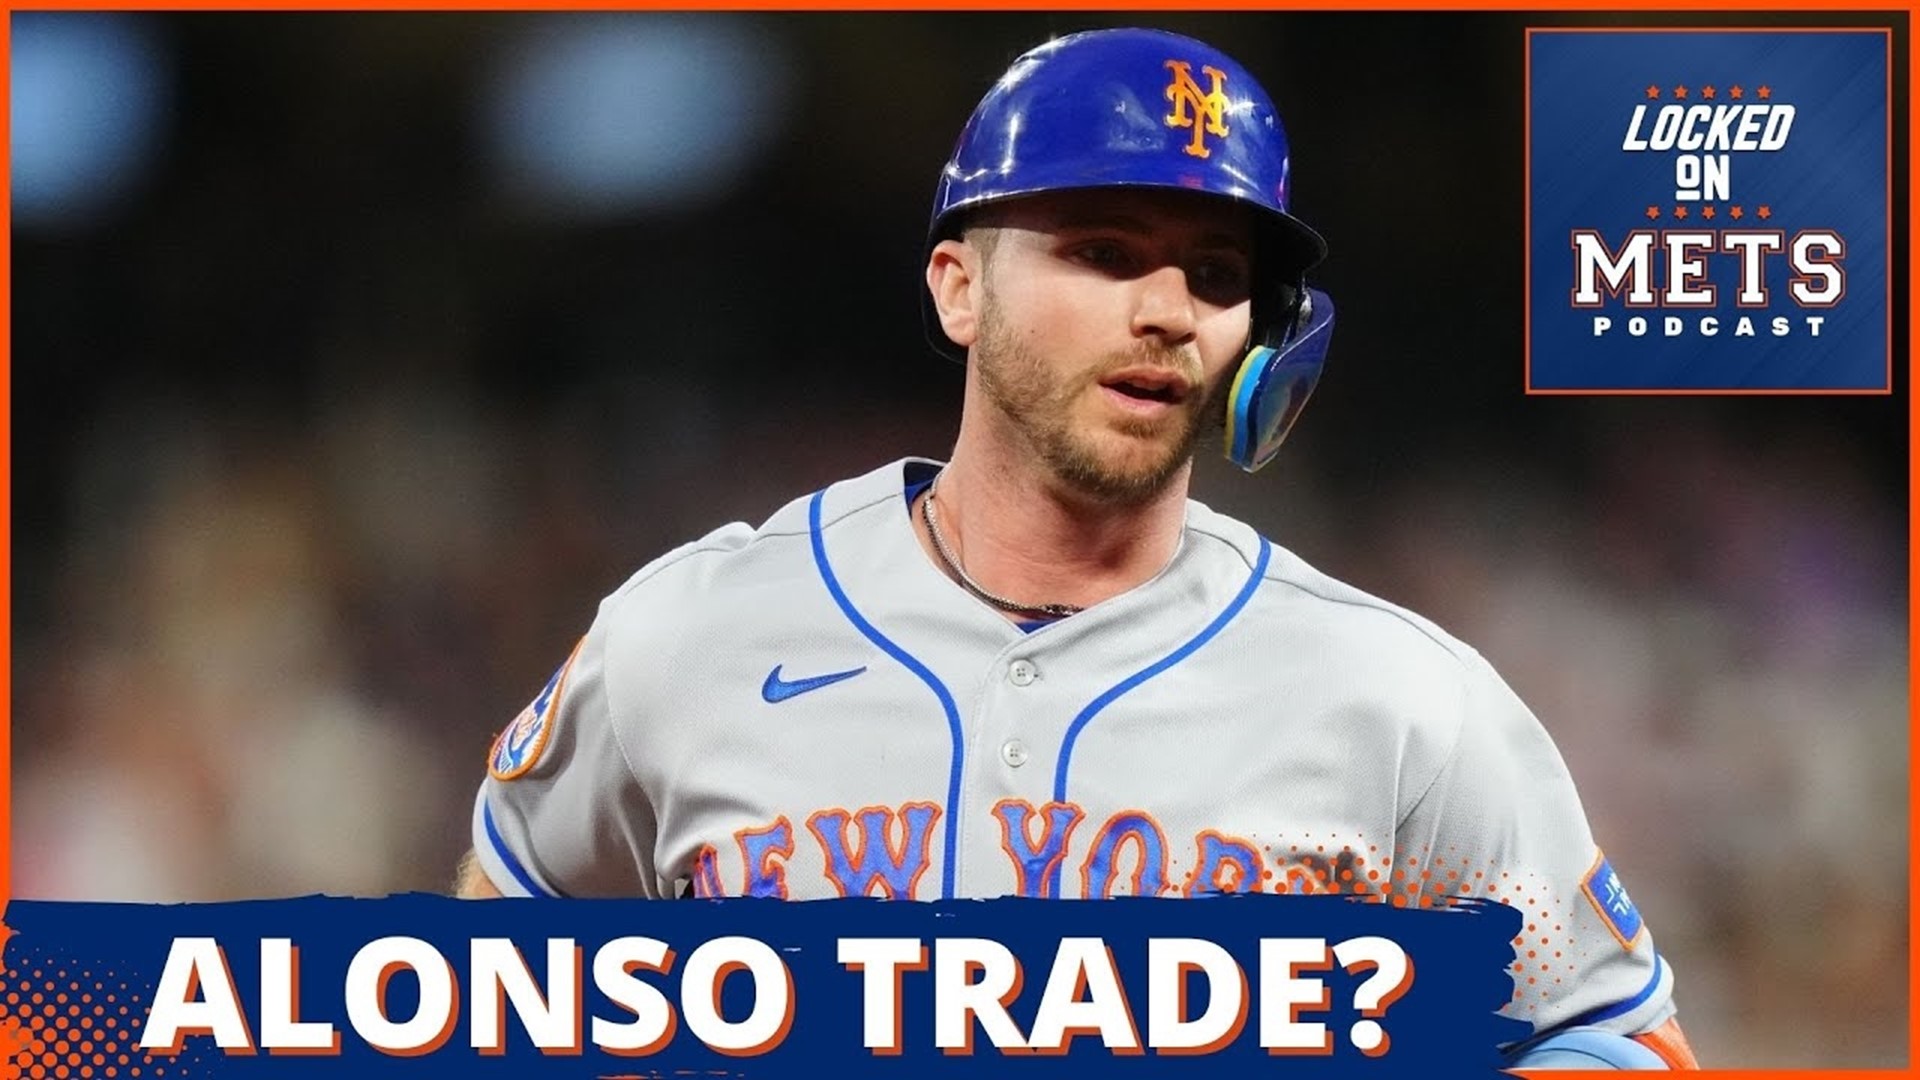 Why You Shouldn't Believe All the Pete Alonso Trade Rumors?